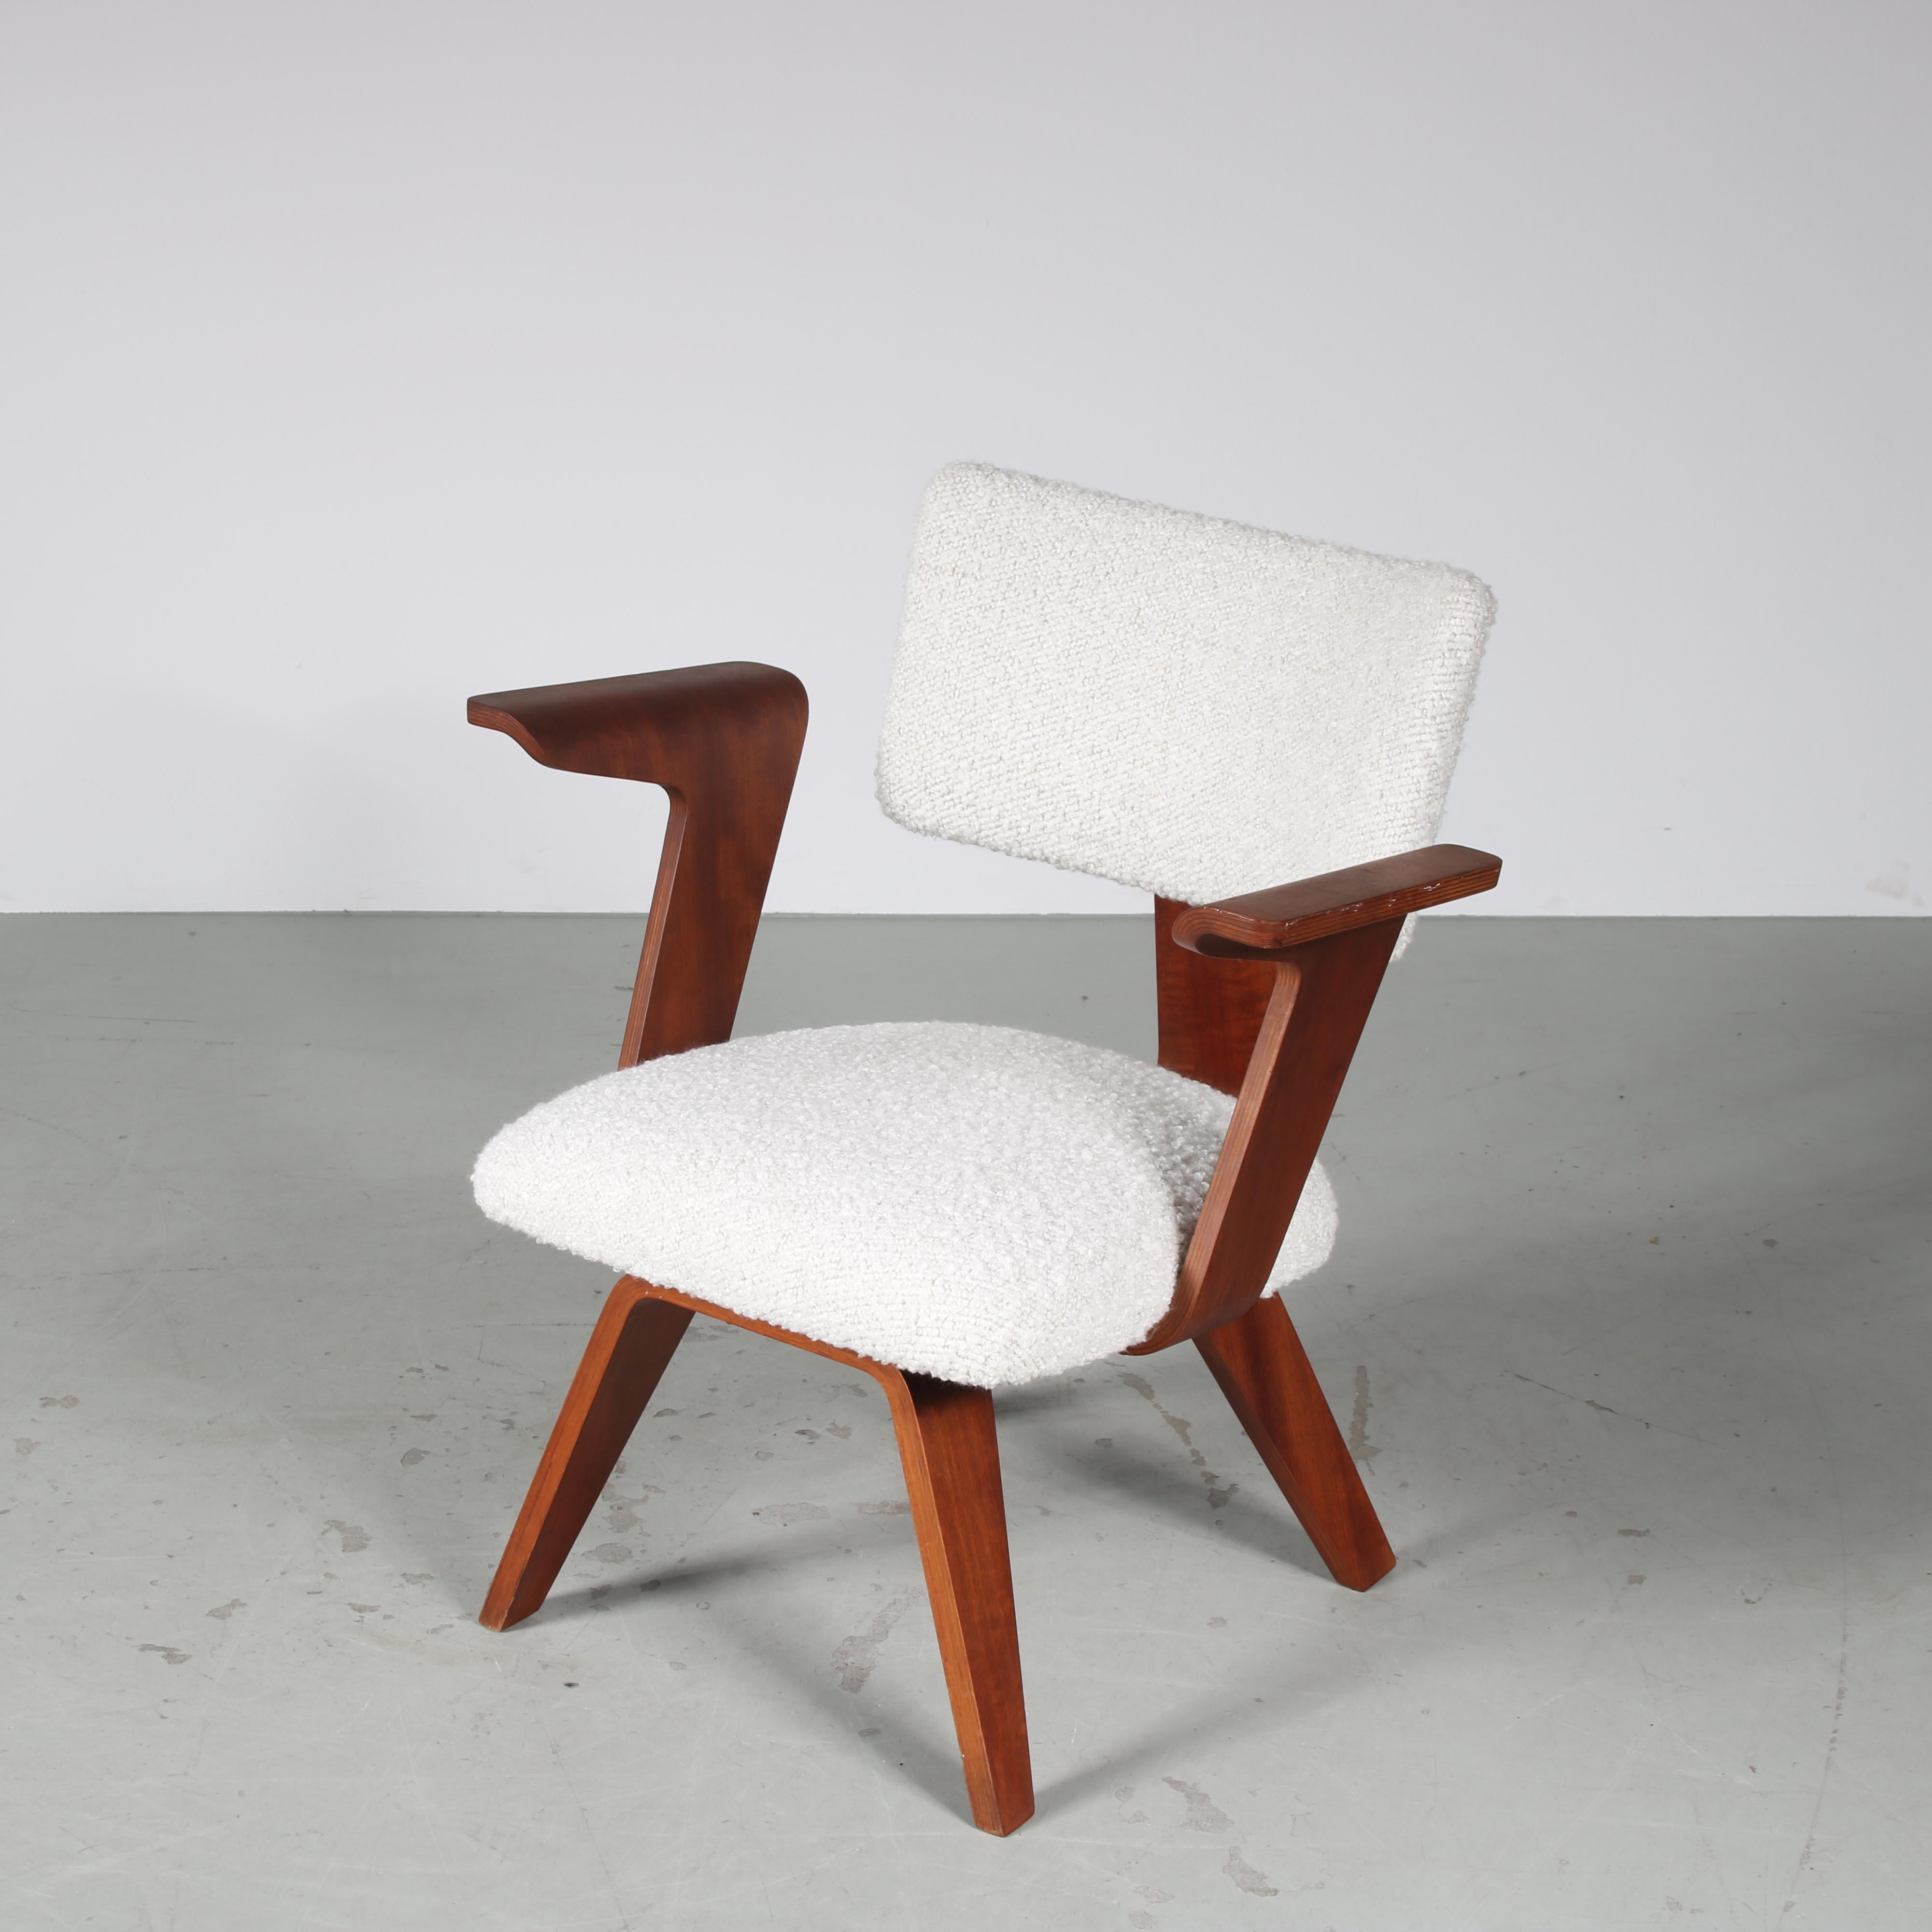 Mid-20th Century Cor Alons Easy Chair for De Boer Gouda, Netherlands 1950 For Sale